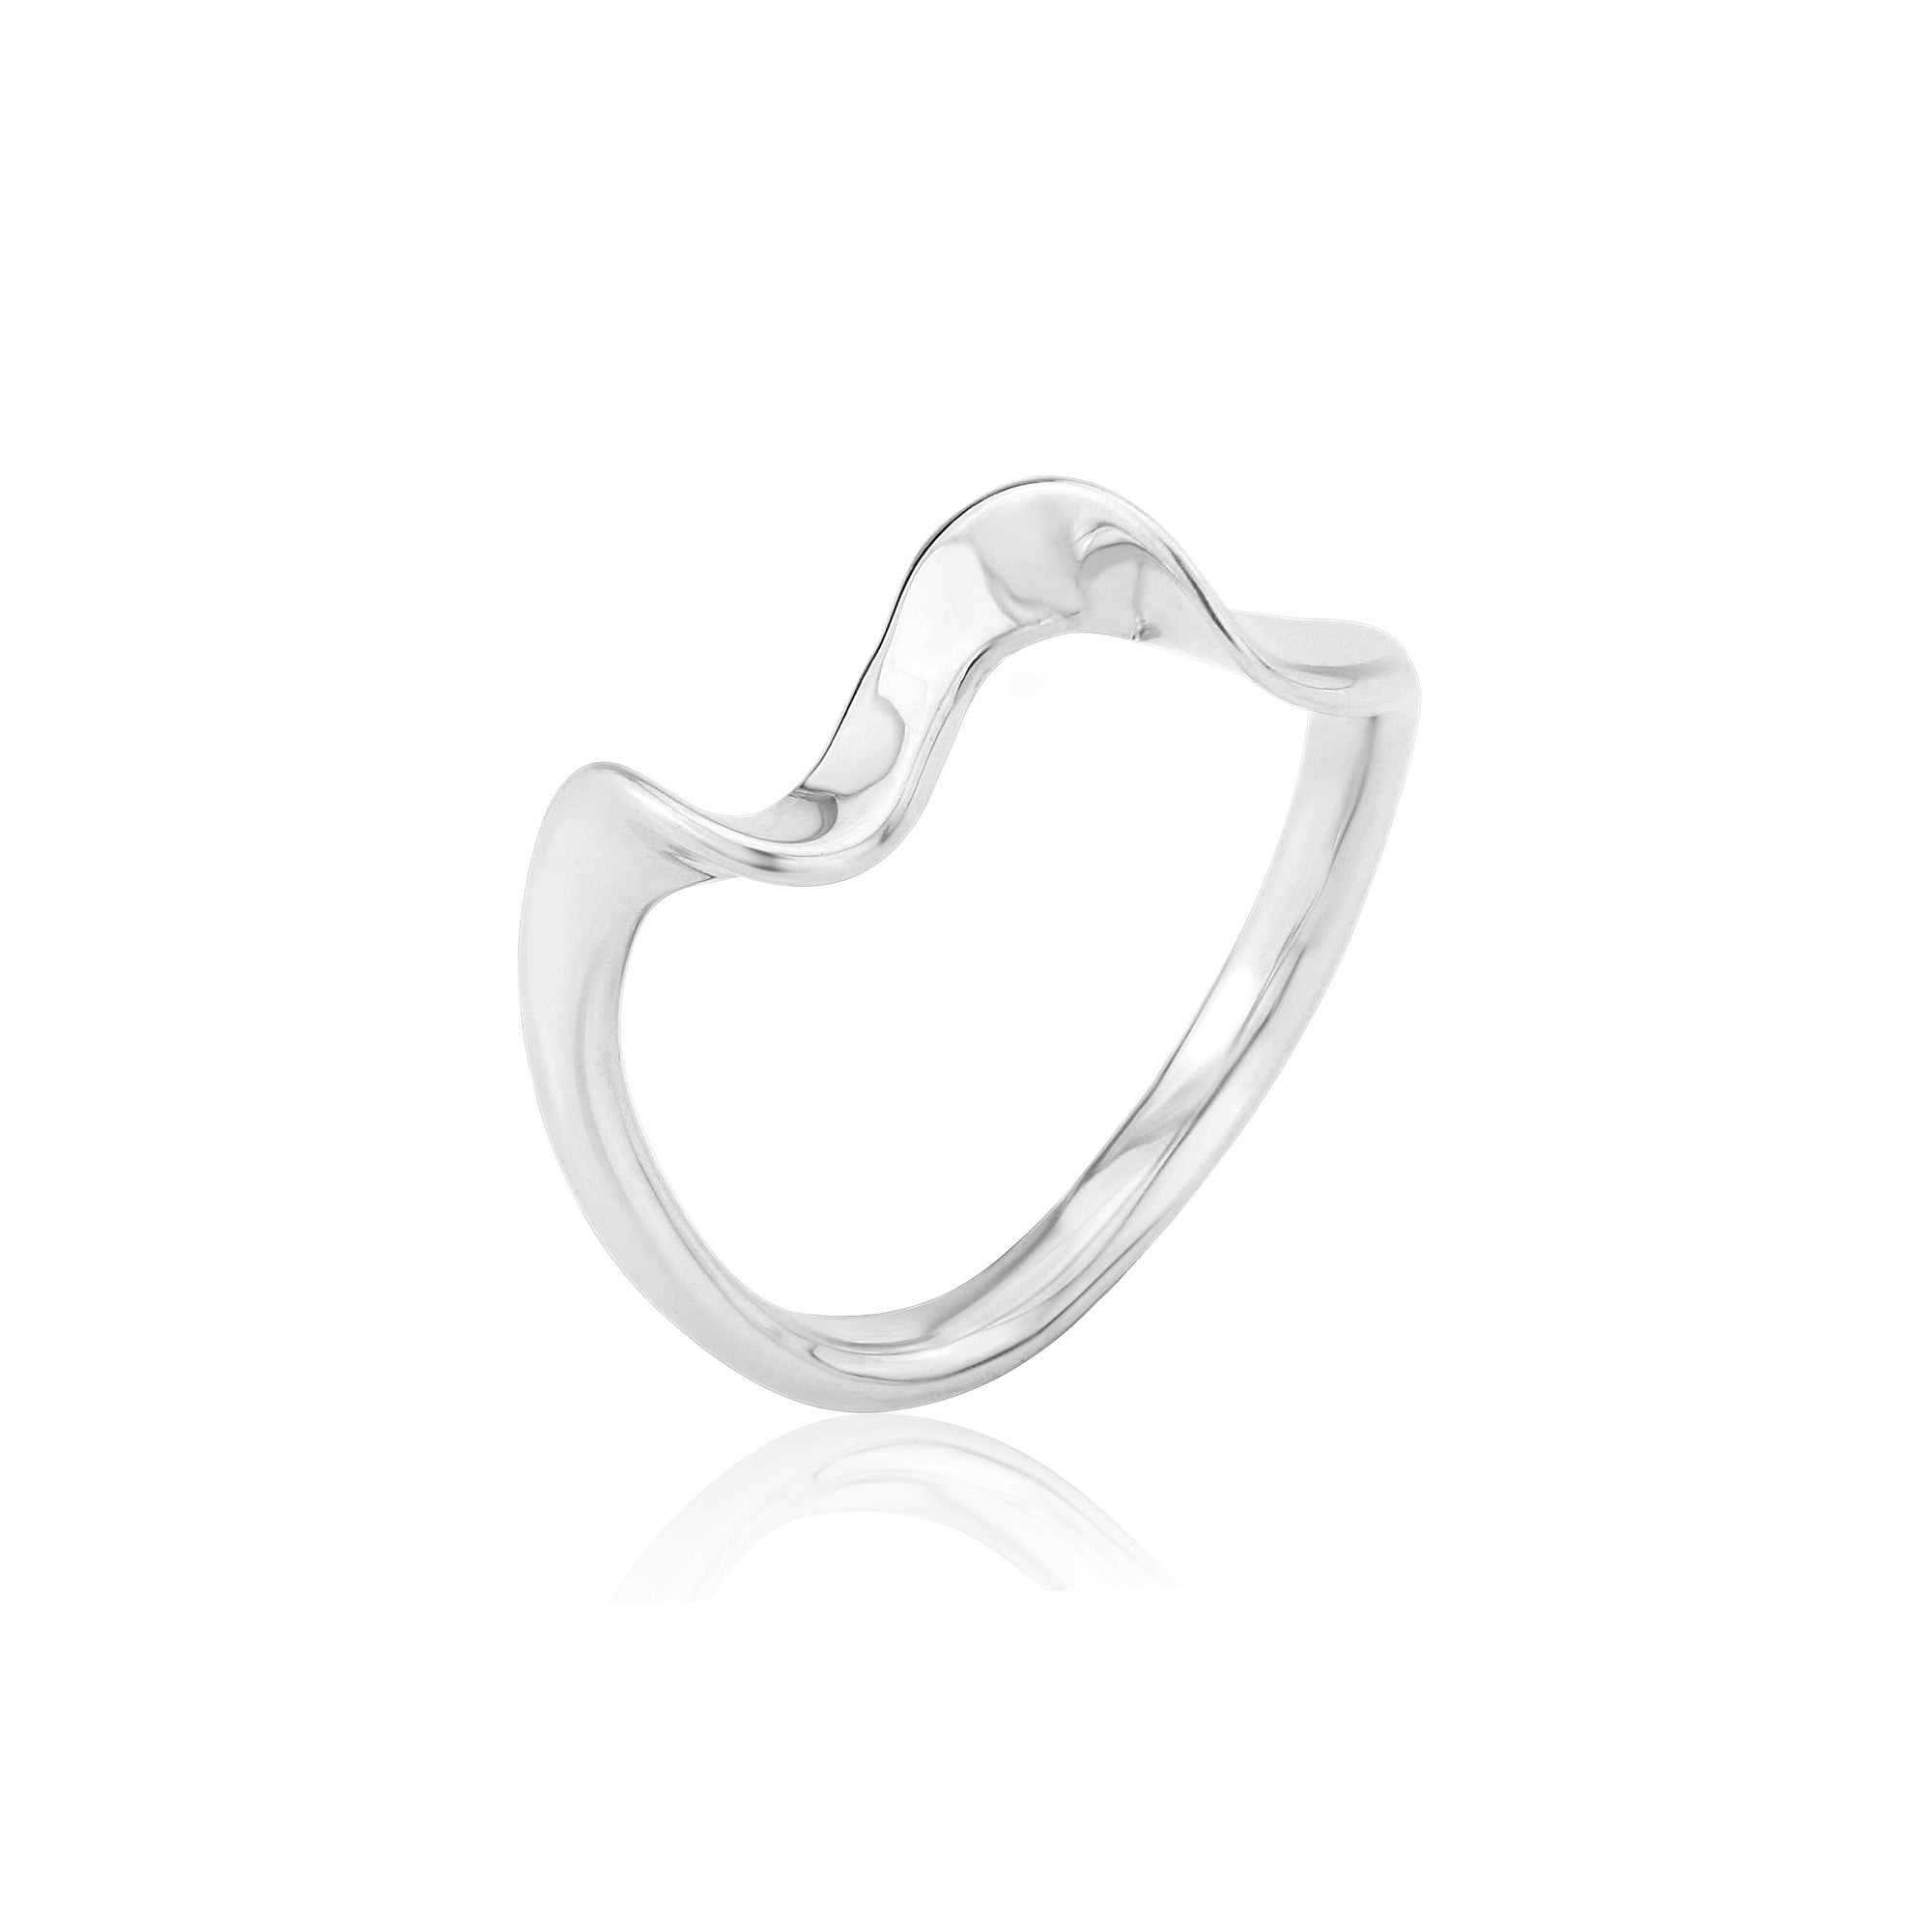 Handmade Sterling Silver Sophia Ring With 3 Tapered Curves